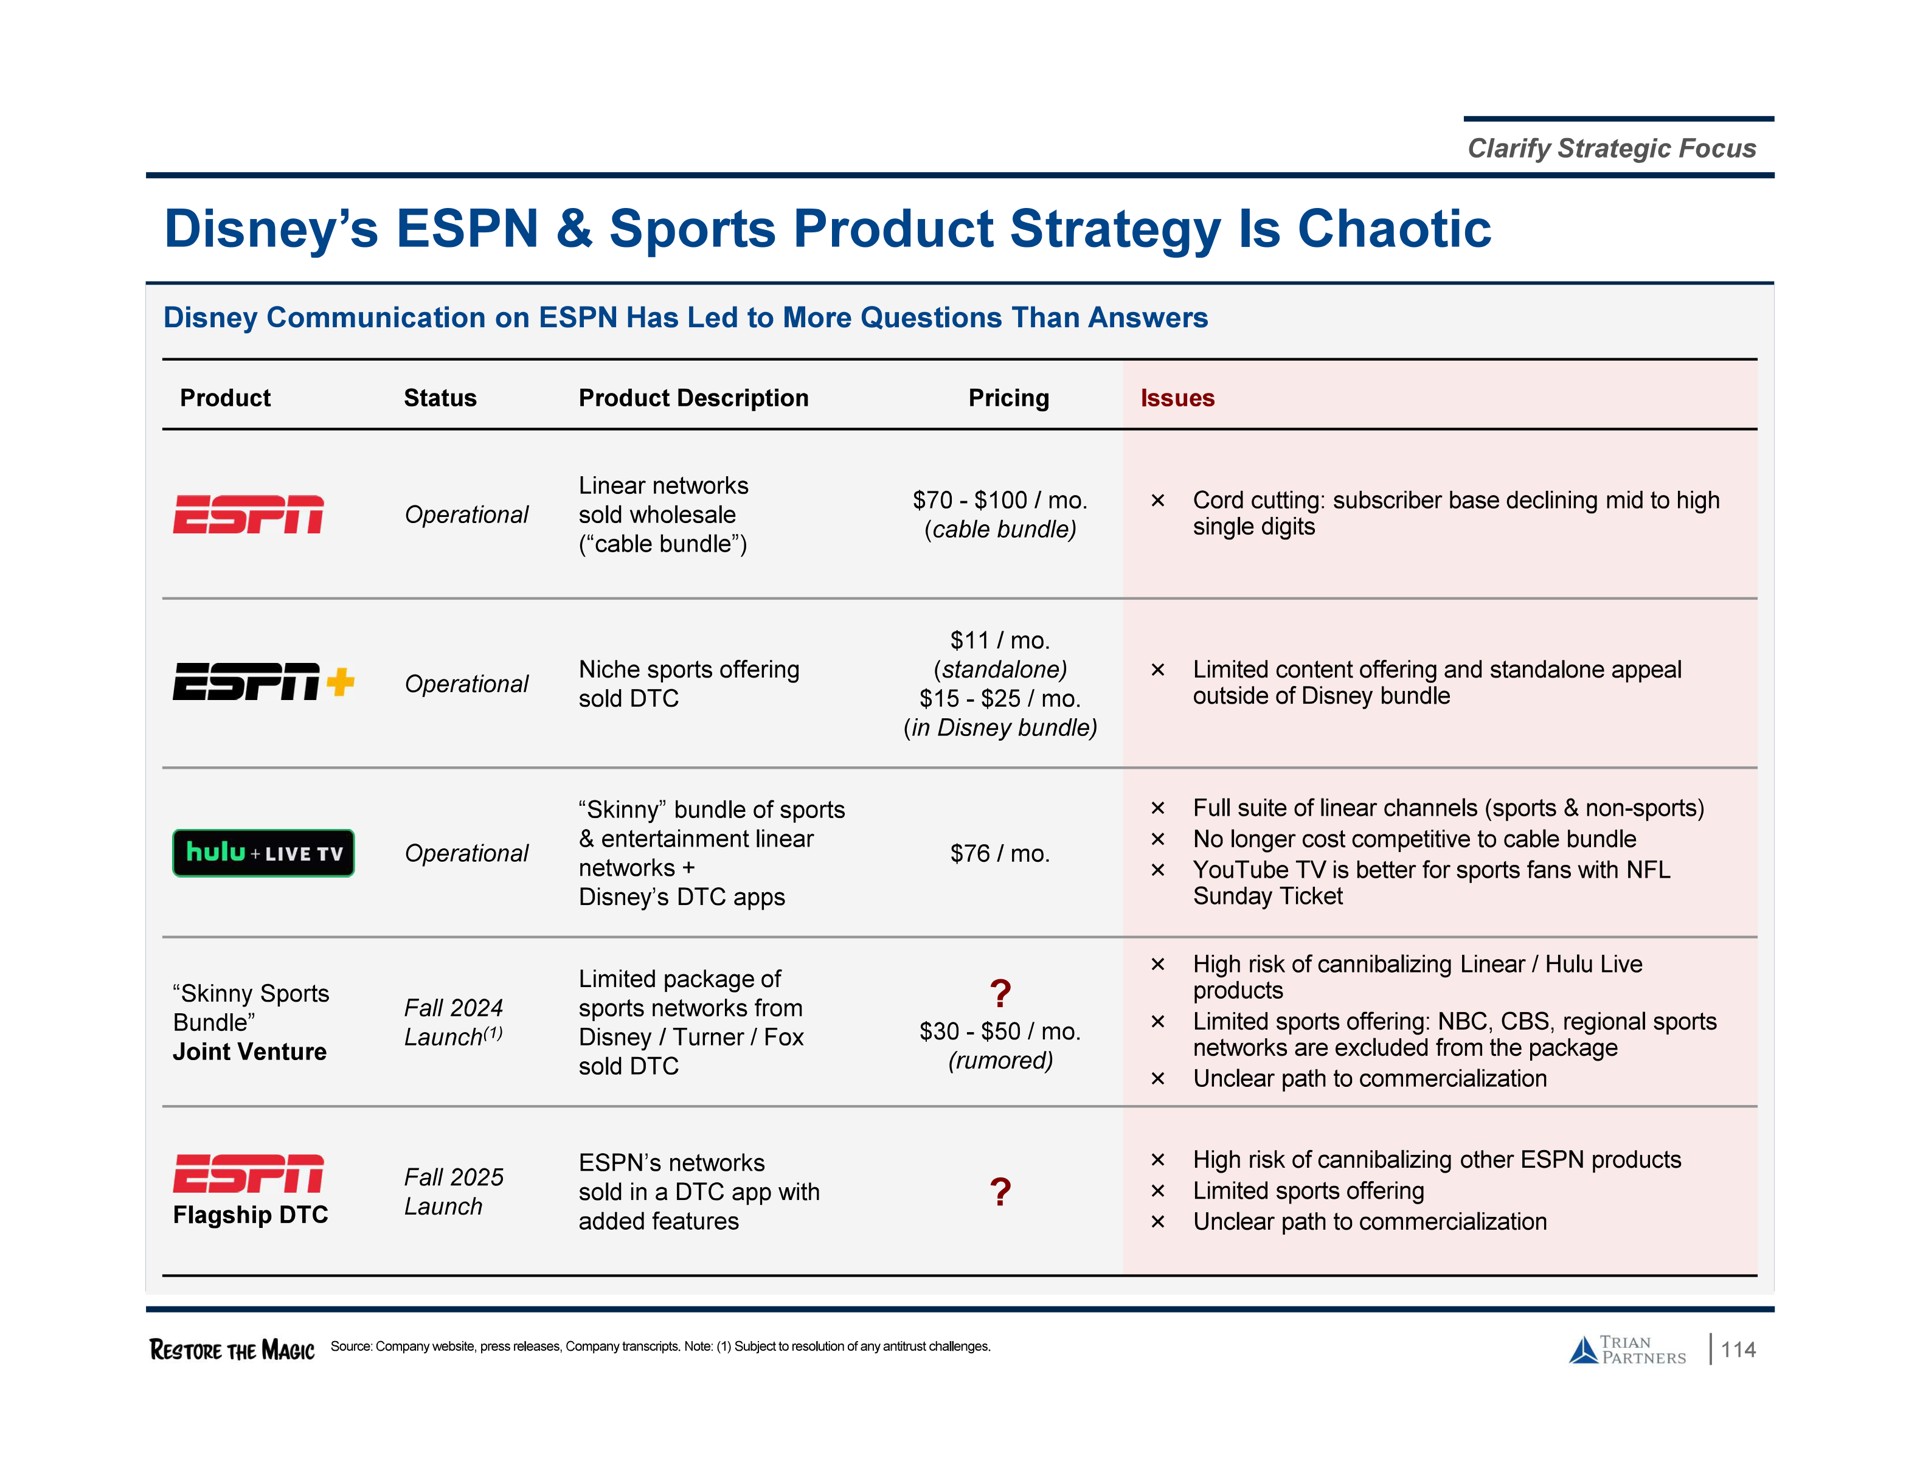 sports product strategy is chaotic | Trian Partners